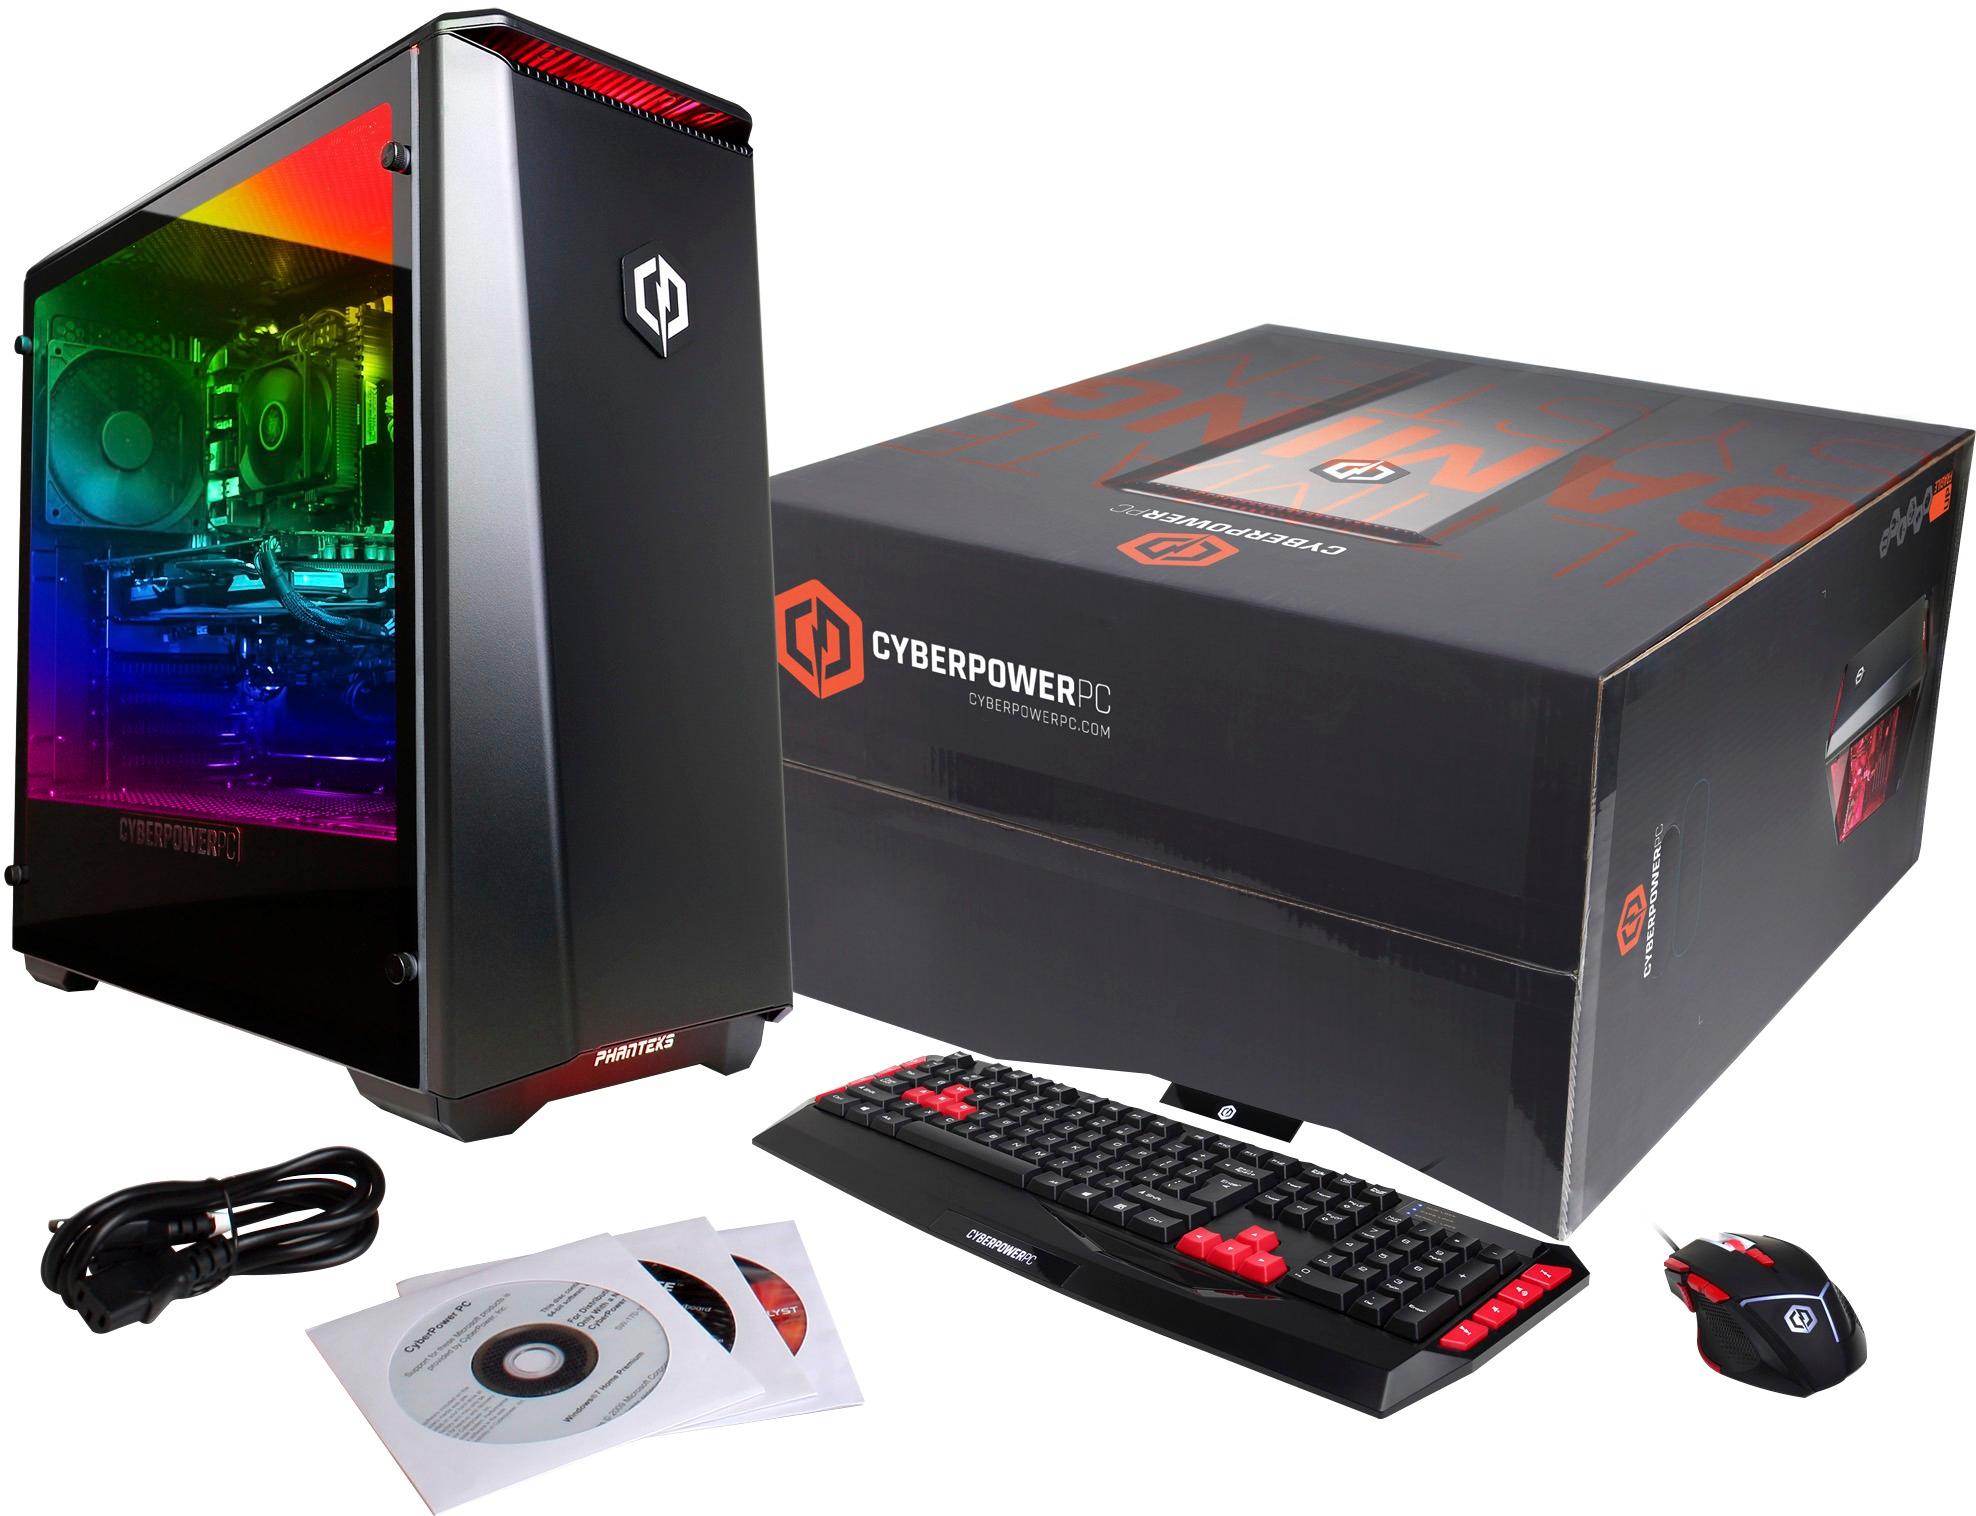 PC GAMER AT THE BEST PRICE, ARMED AND READY TO USE. - Dominican